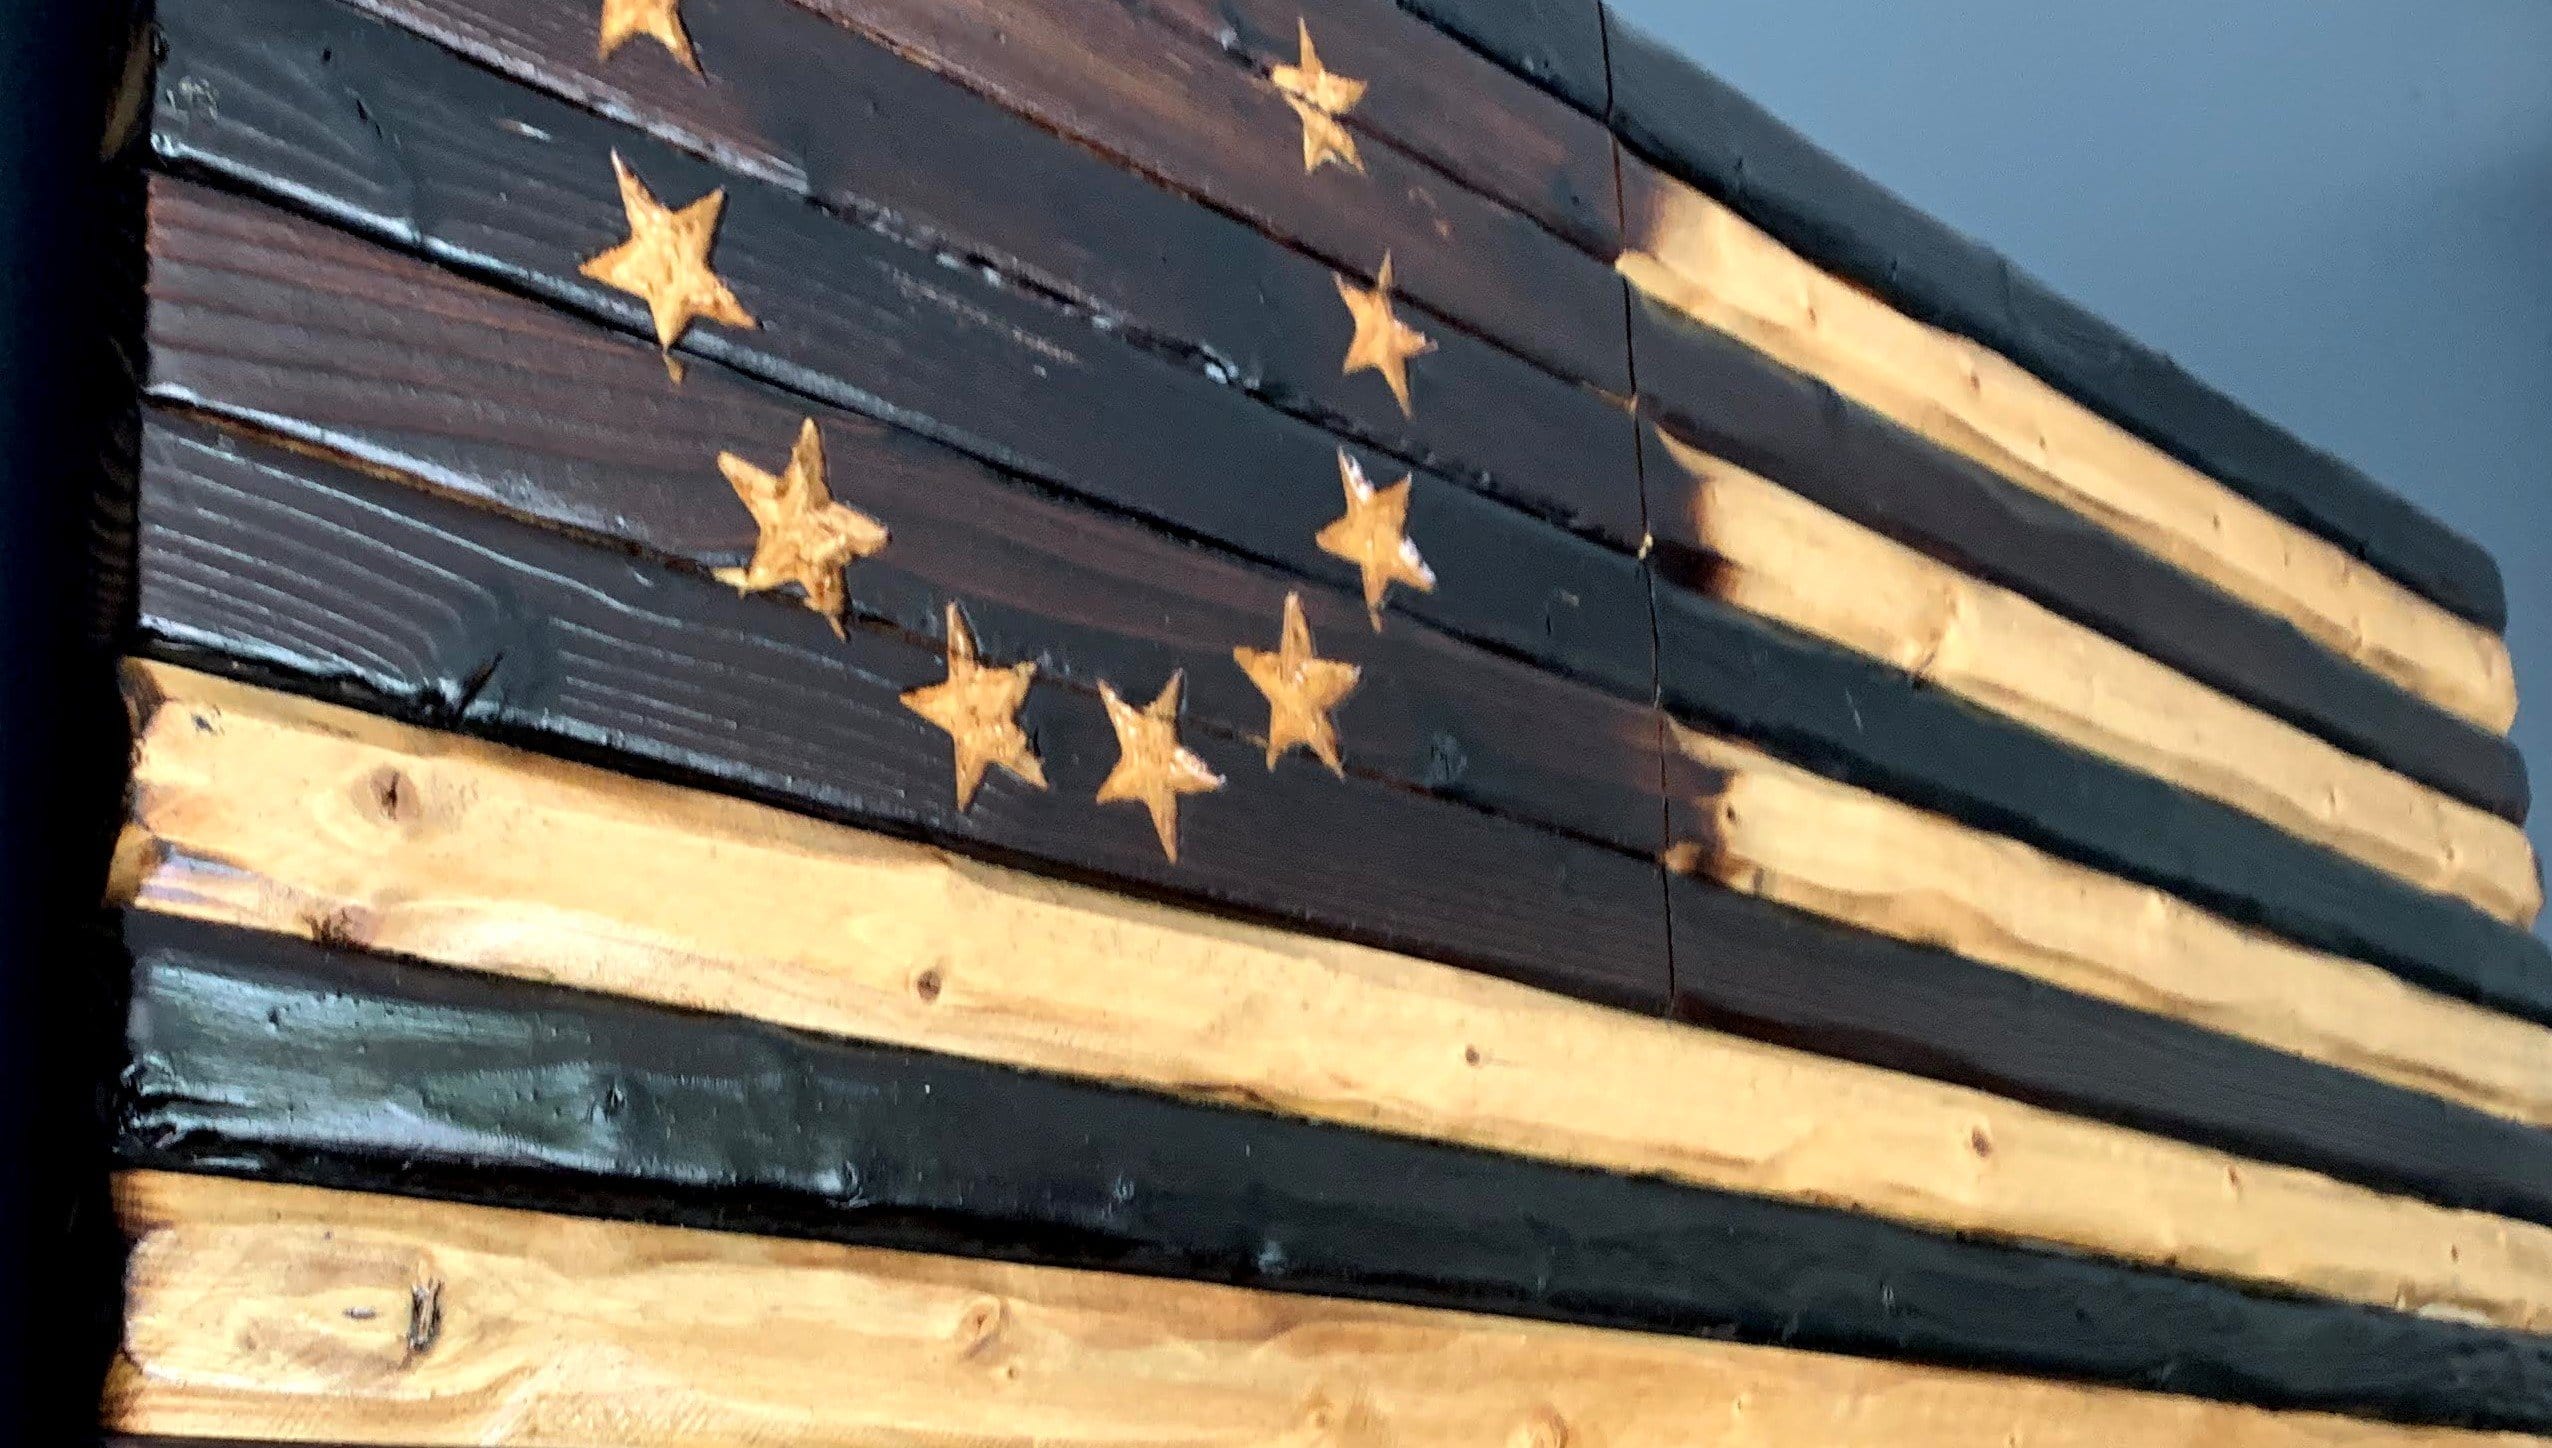 Charred Betsy Ross Handcarved Wooden Flag